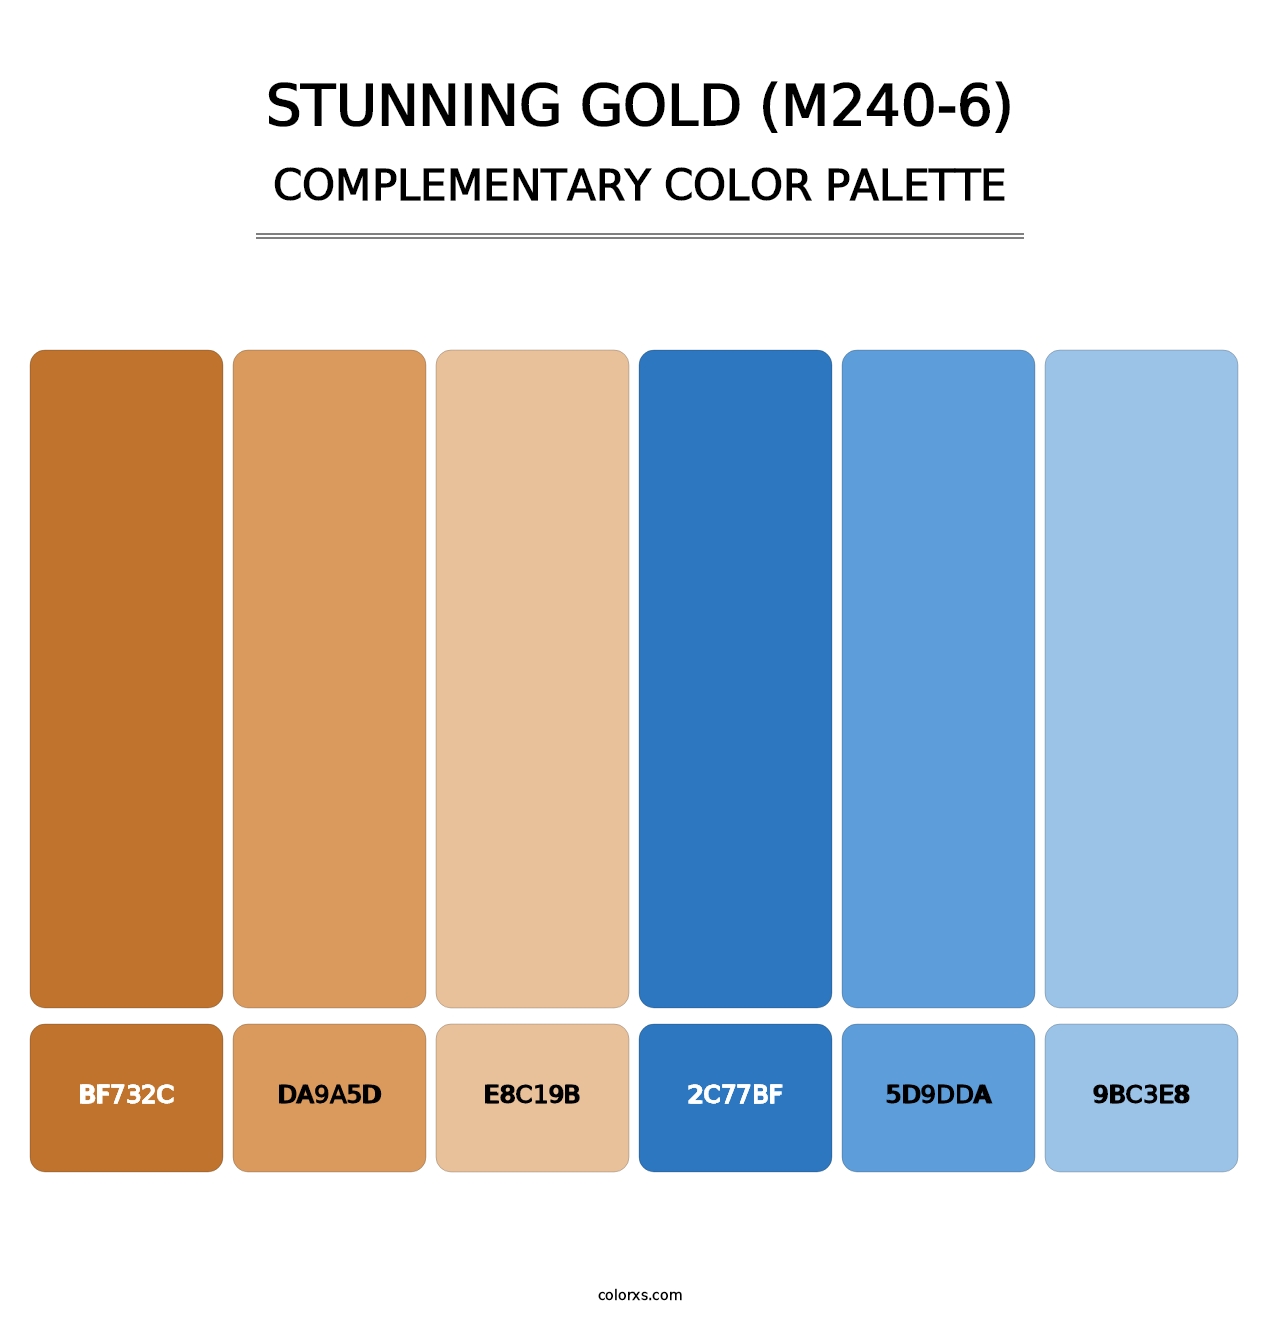 Stunning Gold (M240-6) - Complementary Color Palette